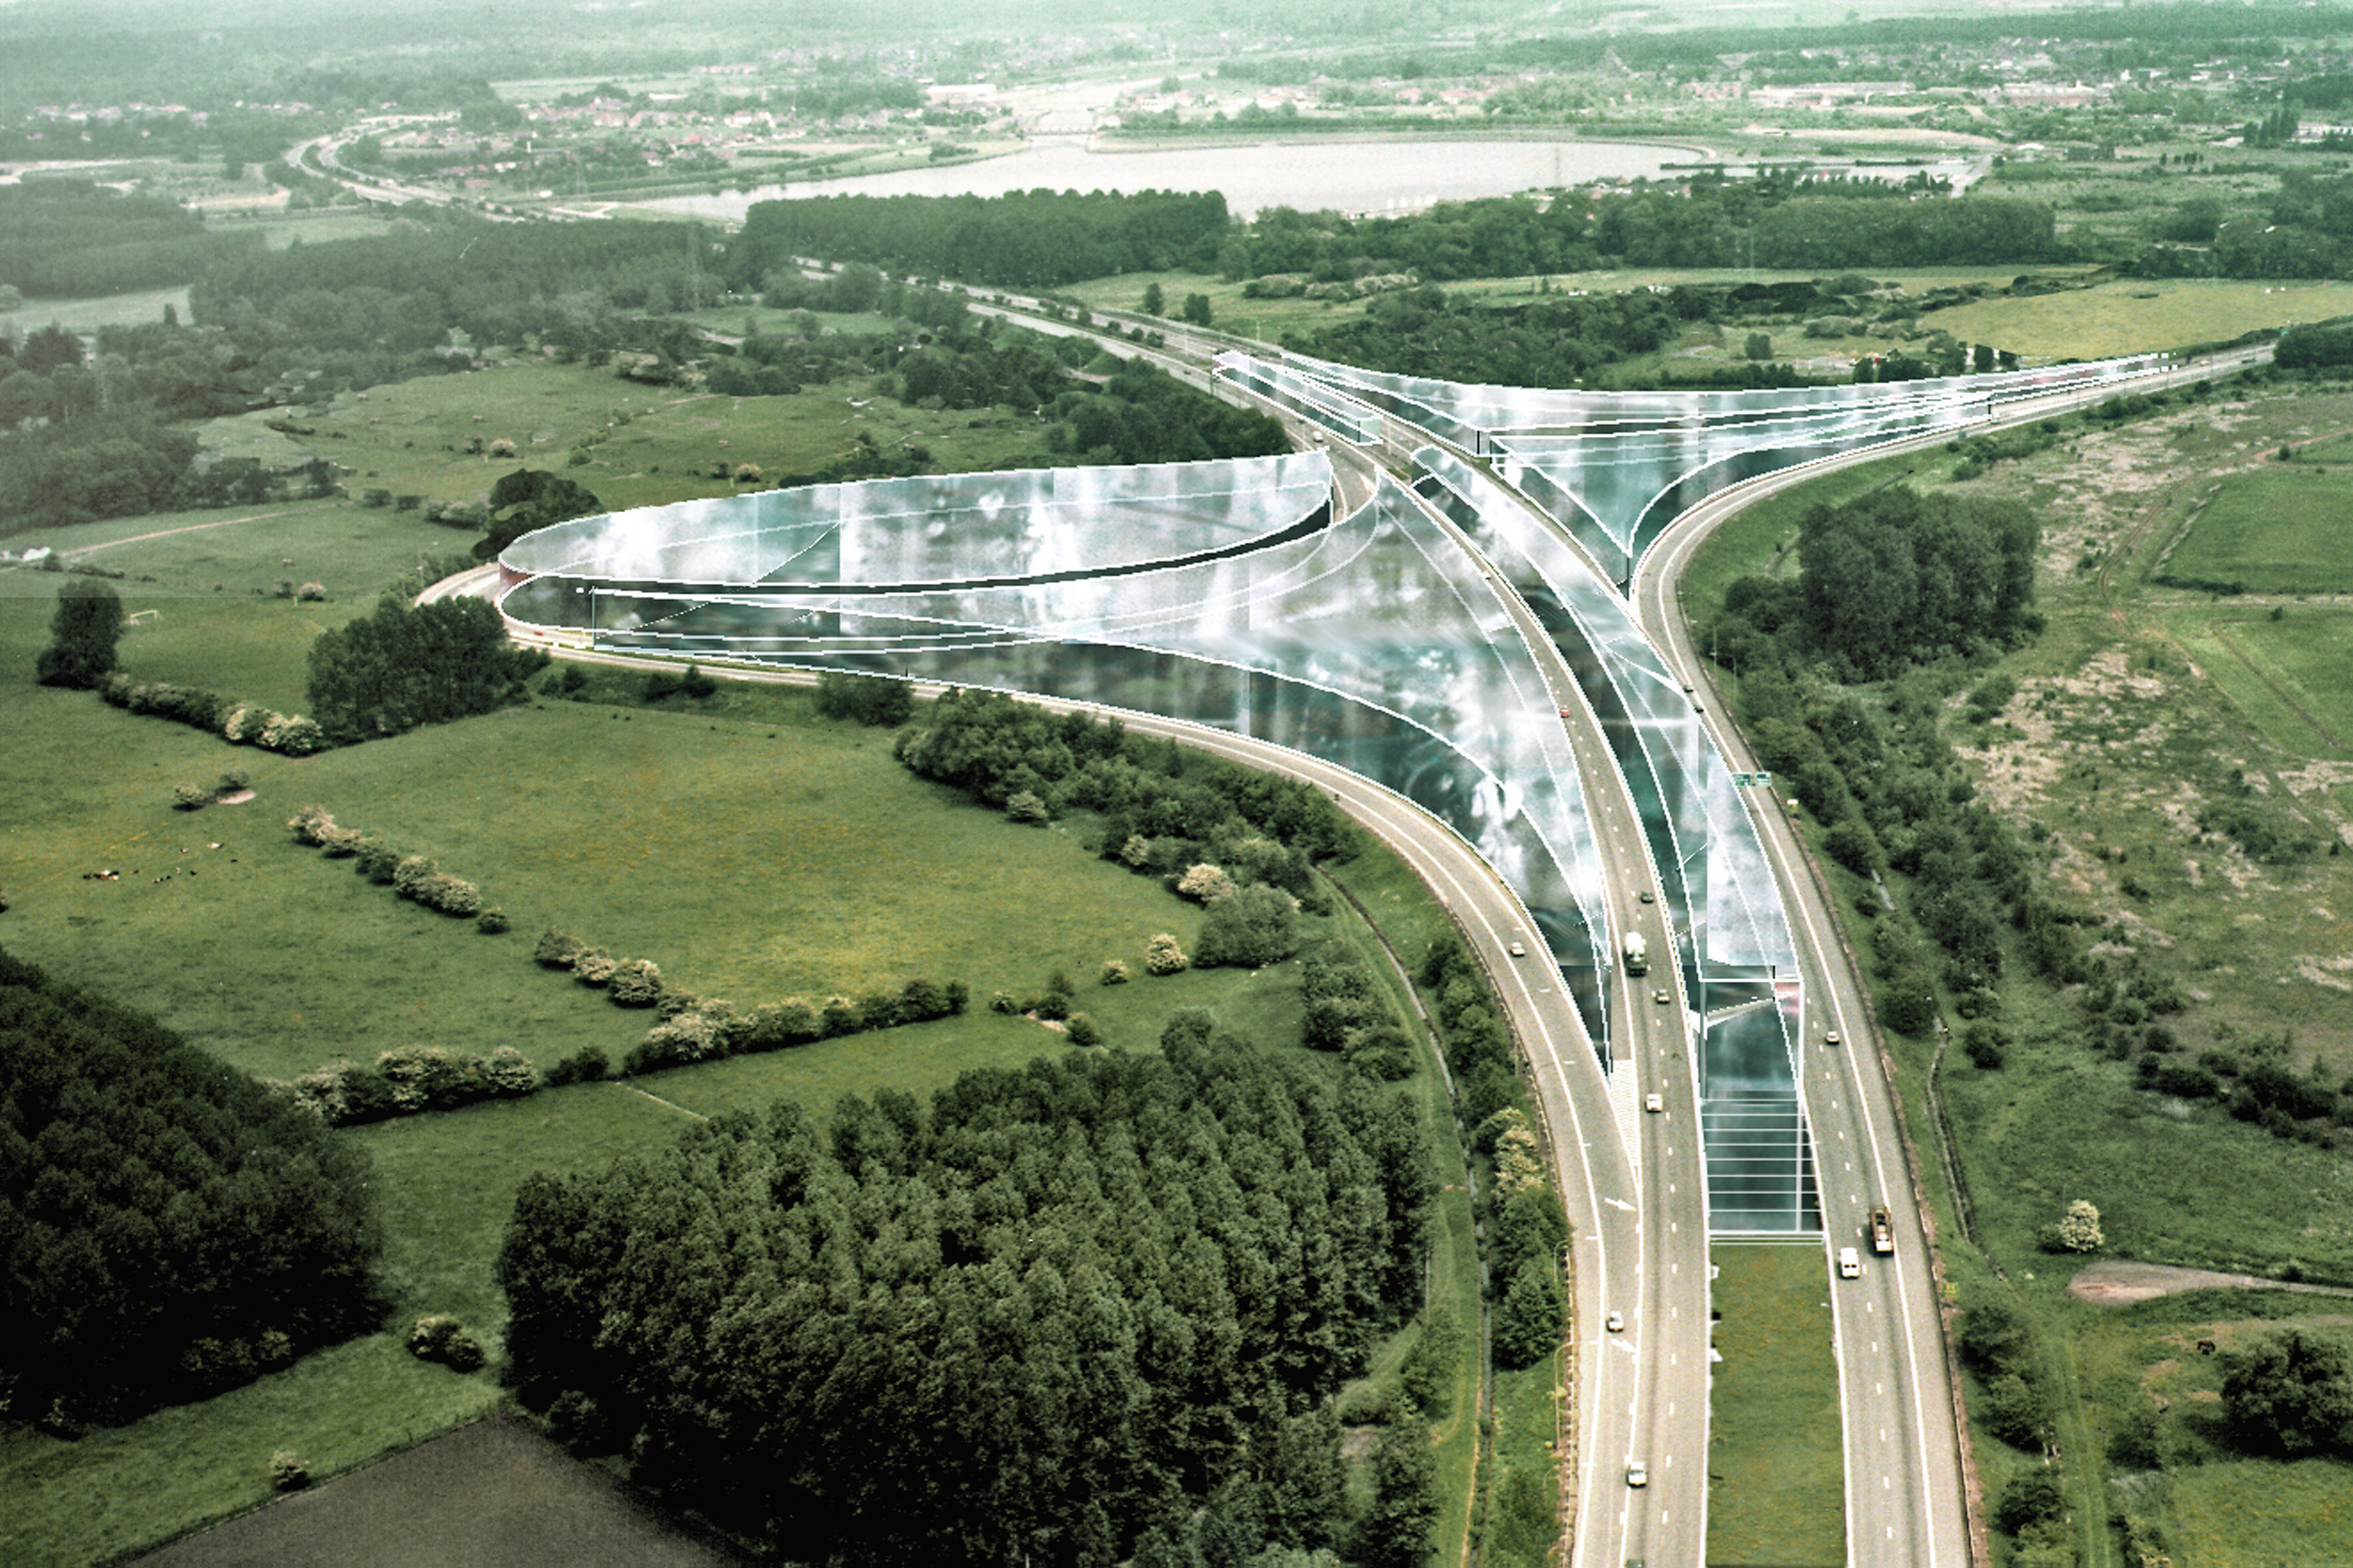 Dirk Coopman, Architect, Intercity highway, economy, underground emission transport, liquid waste, gaseous waste and solid waste, urban planning , autostrade,  automated transport, motorway, autoroute, industrial zones, industrial areas, ecology, motorway junction, motorway intersection, bleu banana logistics becomes green banana